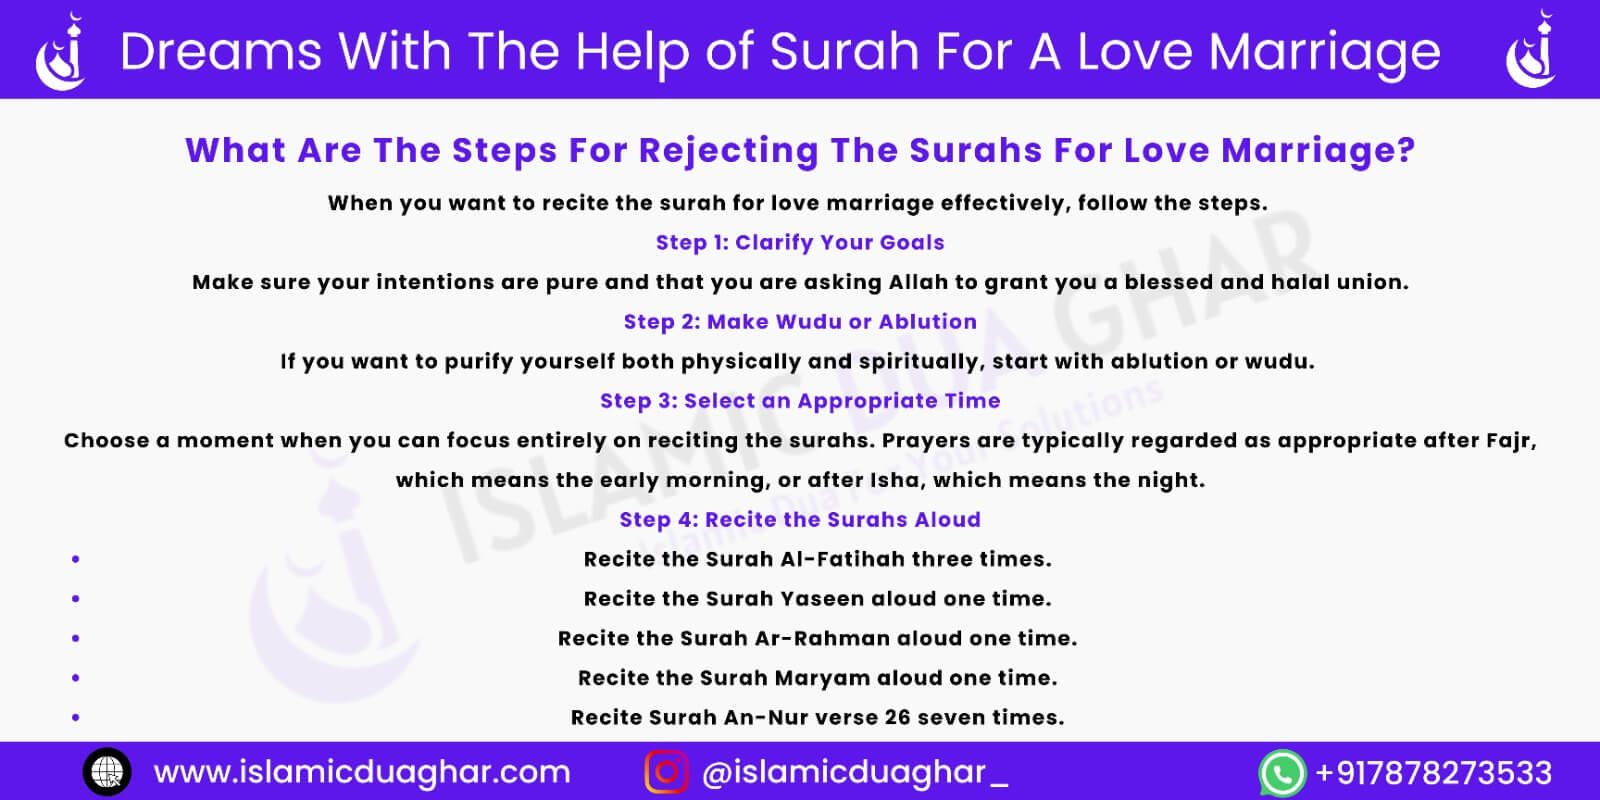 Surah For A Love Marriage